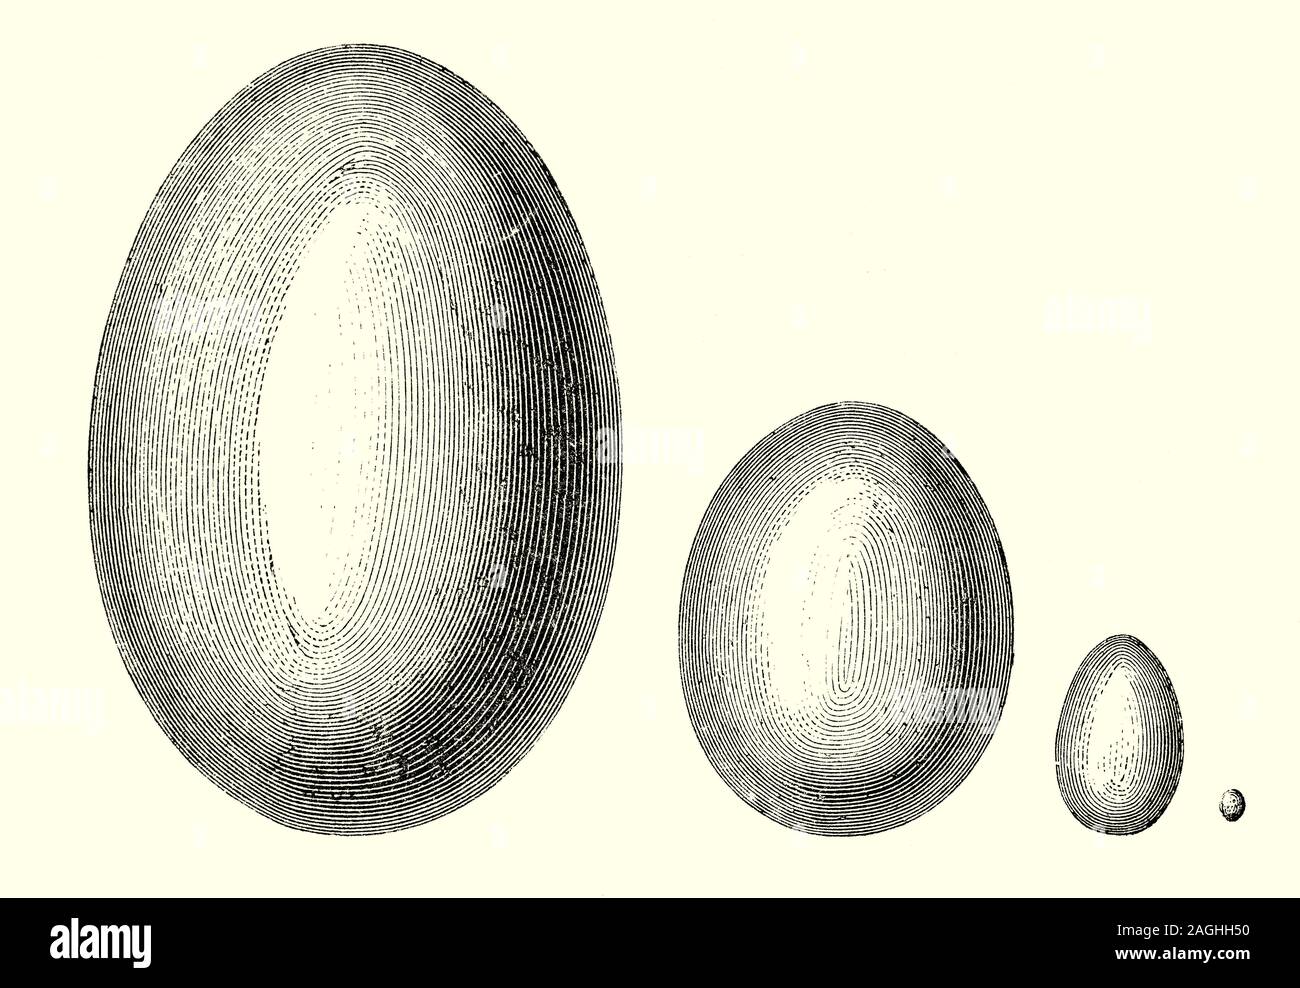 Ornithology: Breeding and Nests: A comparative illustration of the size of bird eggs from different species. Egg size tends to be proportional to the size of the adult bird,from the half gram egg of the bee hummingbird to the 1.5 kg egg of the ostrich. From left to right: An egg of the Aepyornis Maximus weighing up to 730 kilograms (1,600 lb); Ostrich Egg; Domestic Hens Egg; and a humming bird egg. Stock Photo